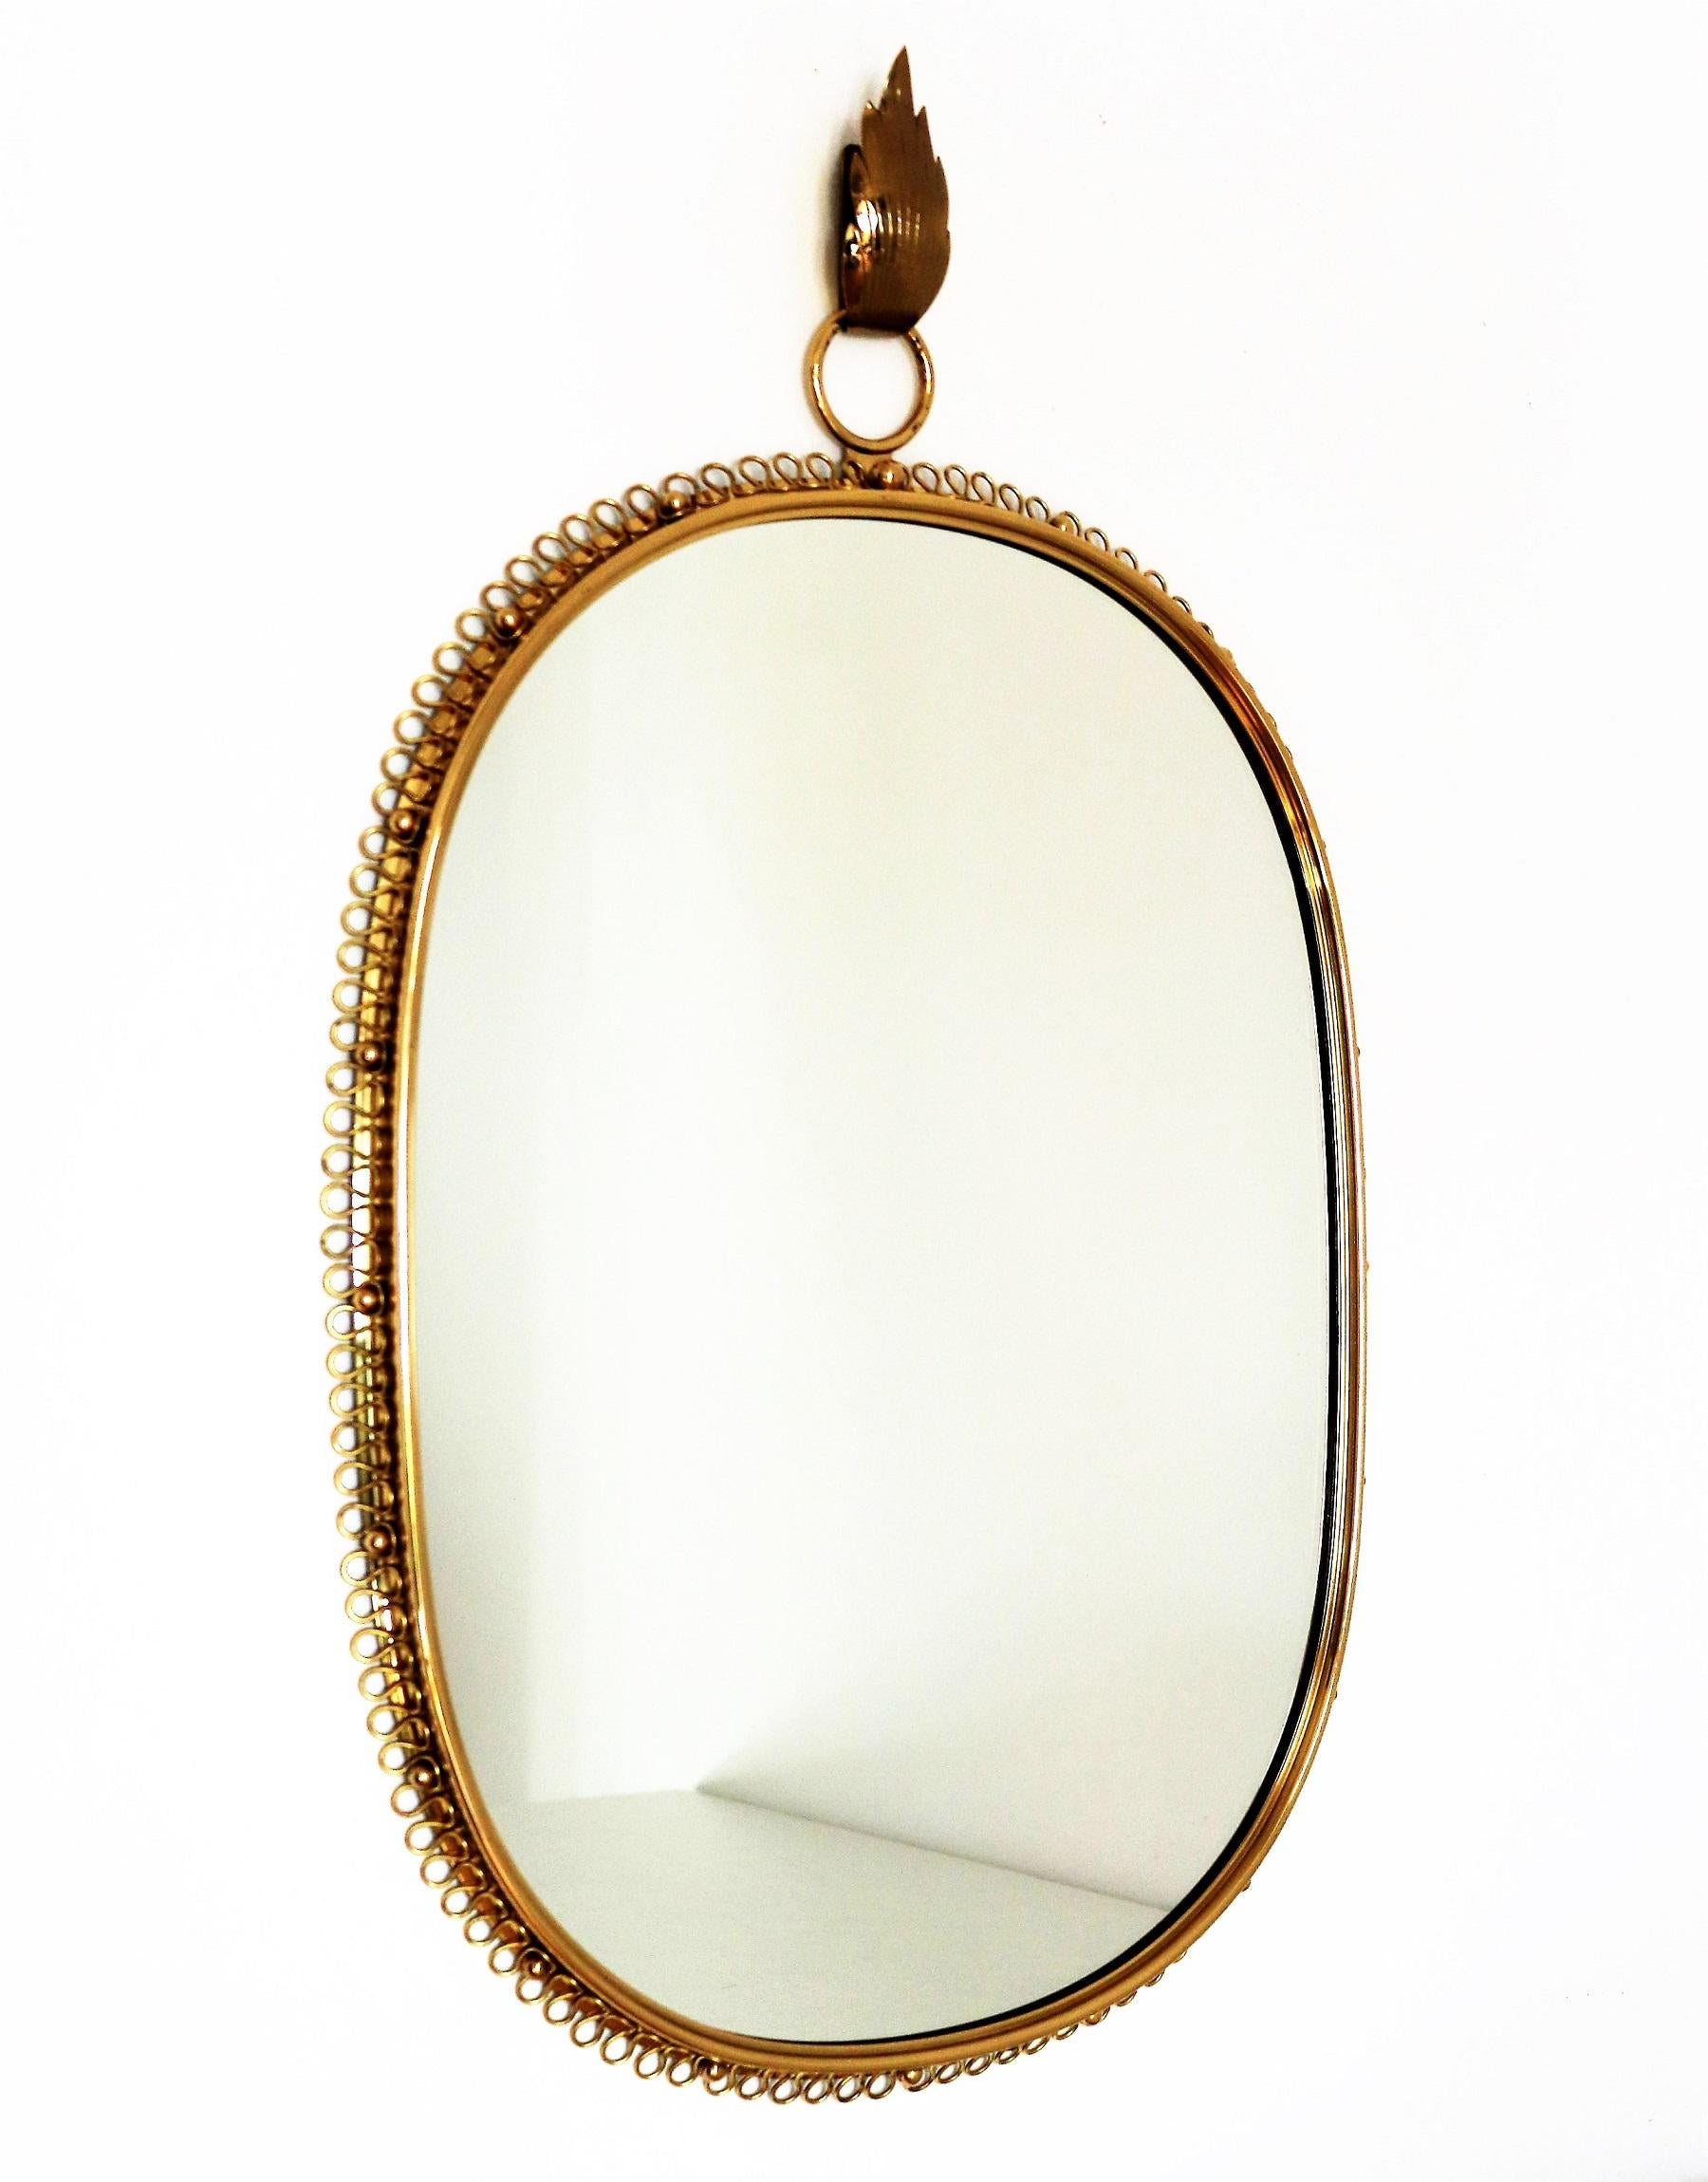 Gorgeous wall mirror designed by Austrian Josef Frank and manufactured in Sweden by Svenskt Tenn in the mid-century.
This mirror is made of full shiny brass frame with spiral loop frame around and big round hanging hook on top. 
You can easily